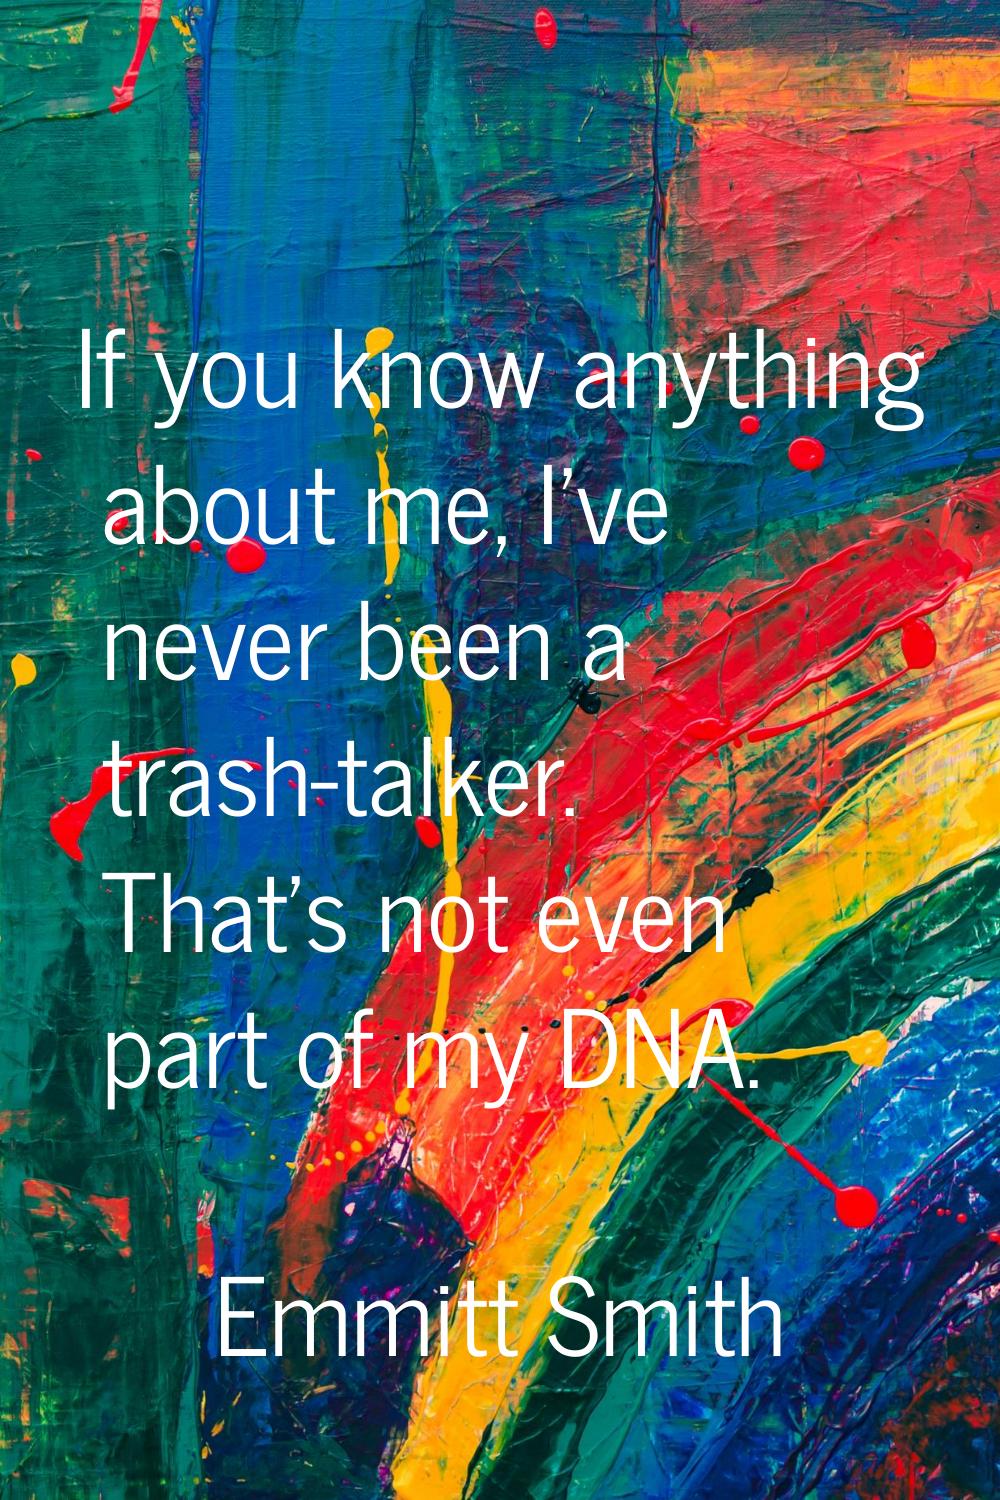 If you know anything about me, I've never been a trash-talker. That's not even part of my DNA.